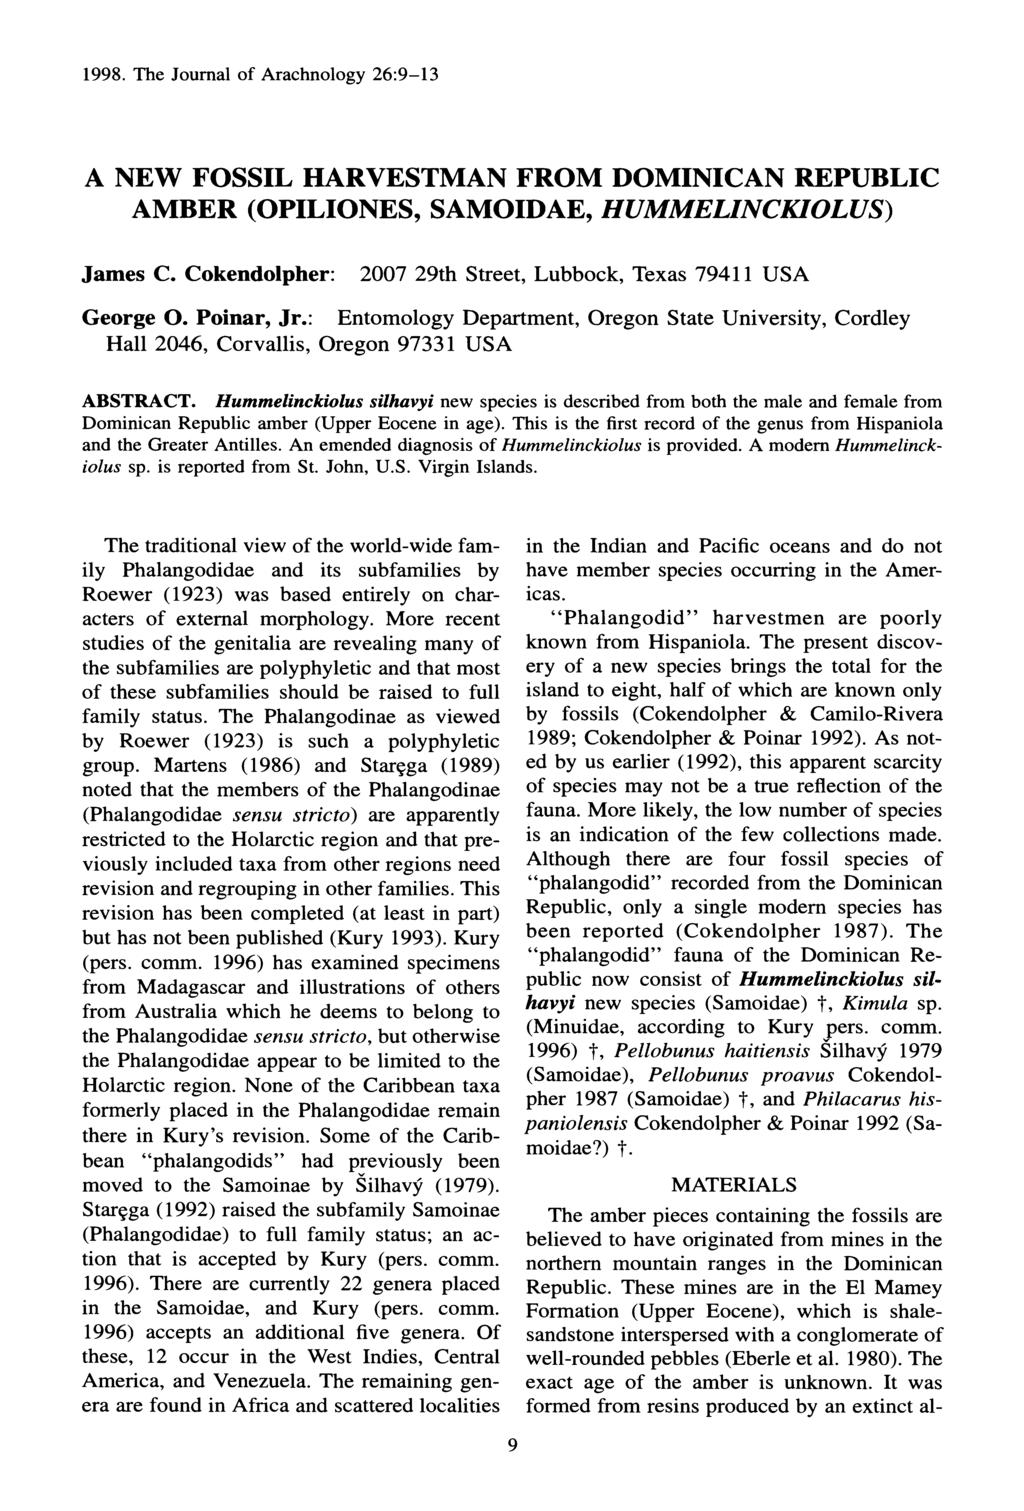 1998. The Journal of Arachnology 26:9-13 A NEW FOSSIL HARVESTMAN FROM DOMINICAN REPUBLIC AMBER (OPILIONES, SAMOIDAE, HUMMELINCKIOLUS) James C.